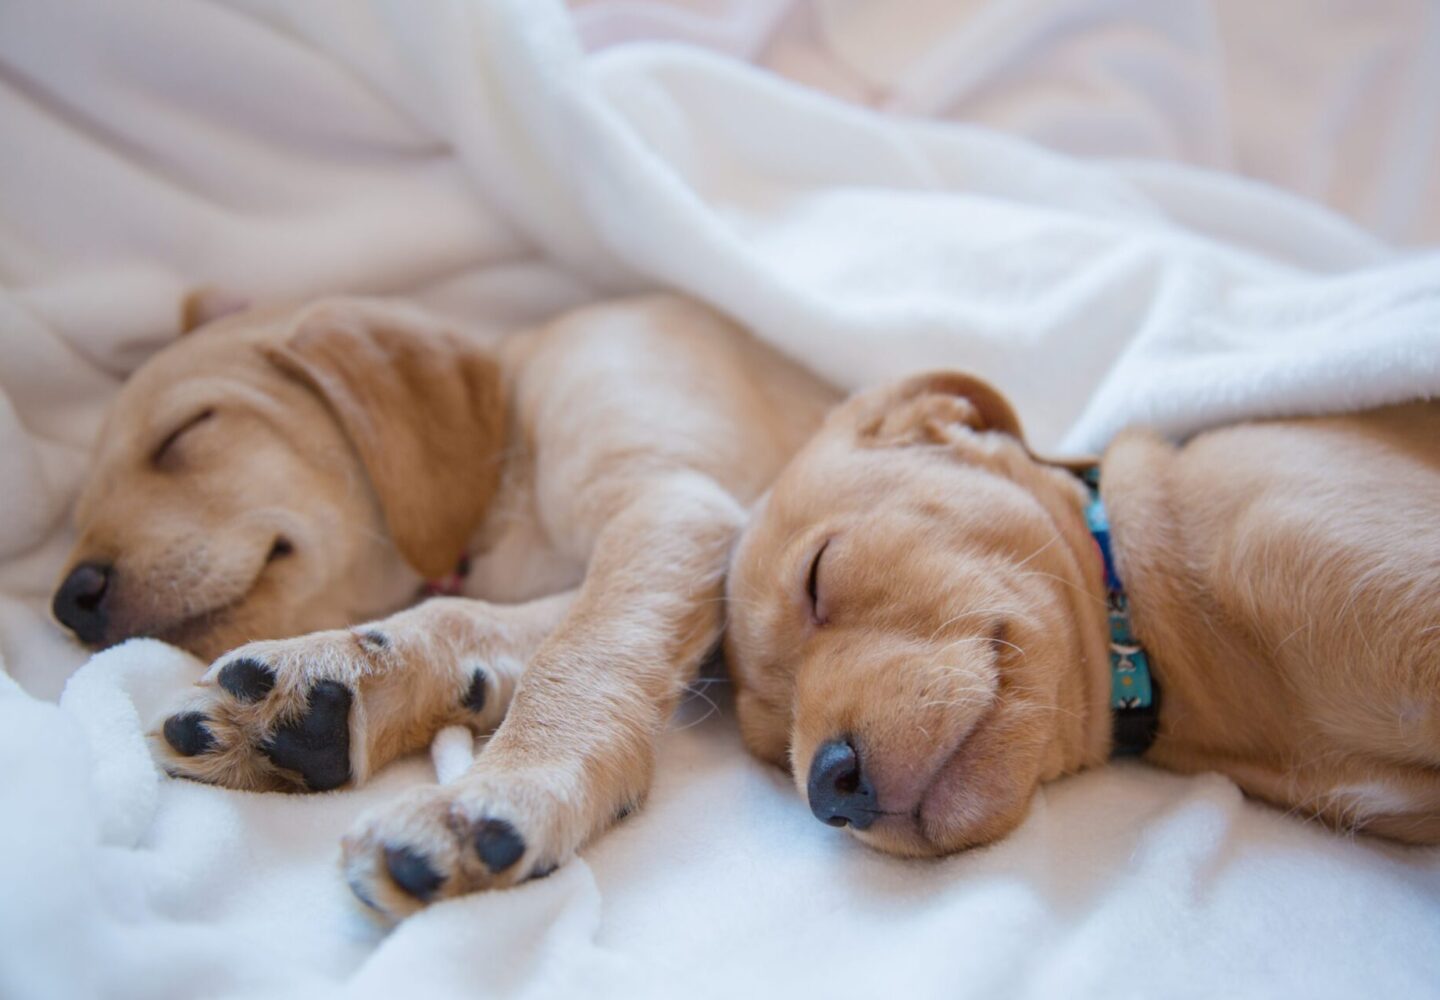 Your Dog Bedding: A Cozy Little Nest for Furry Friends shutterstock 1112544683 scaled 1 dog care